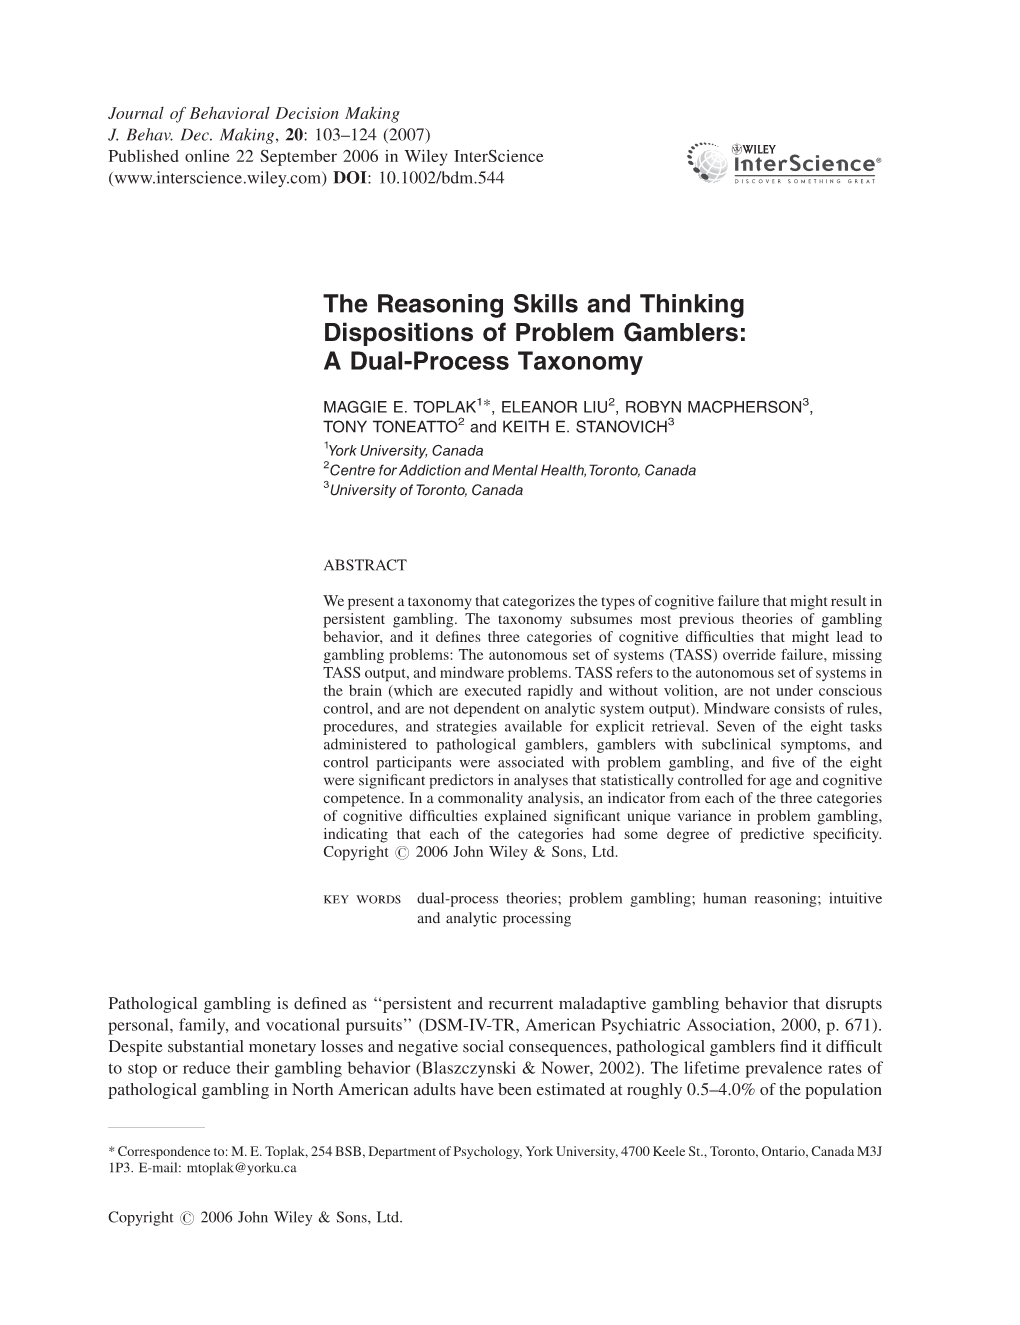 The Reasoning Skills and Thinking Dispositions of Problem Gamblers: a Dual-Process Taxonomy